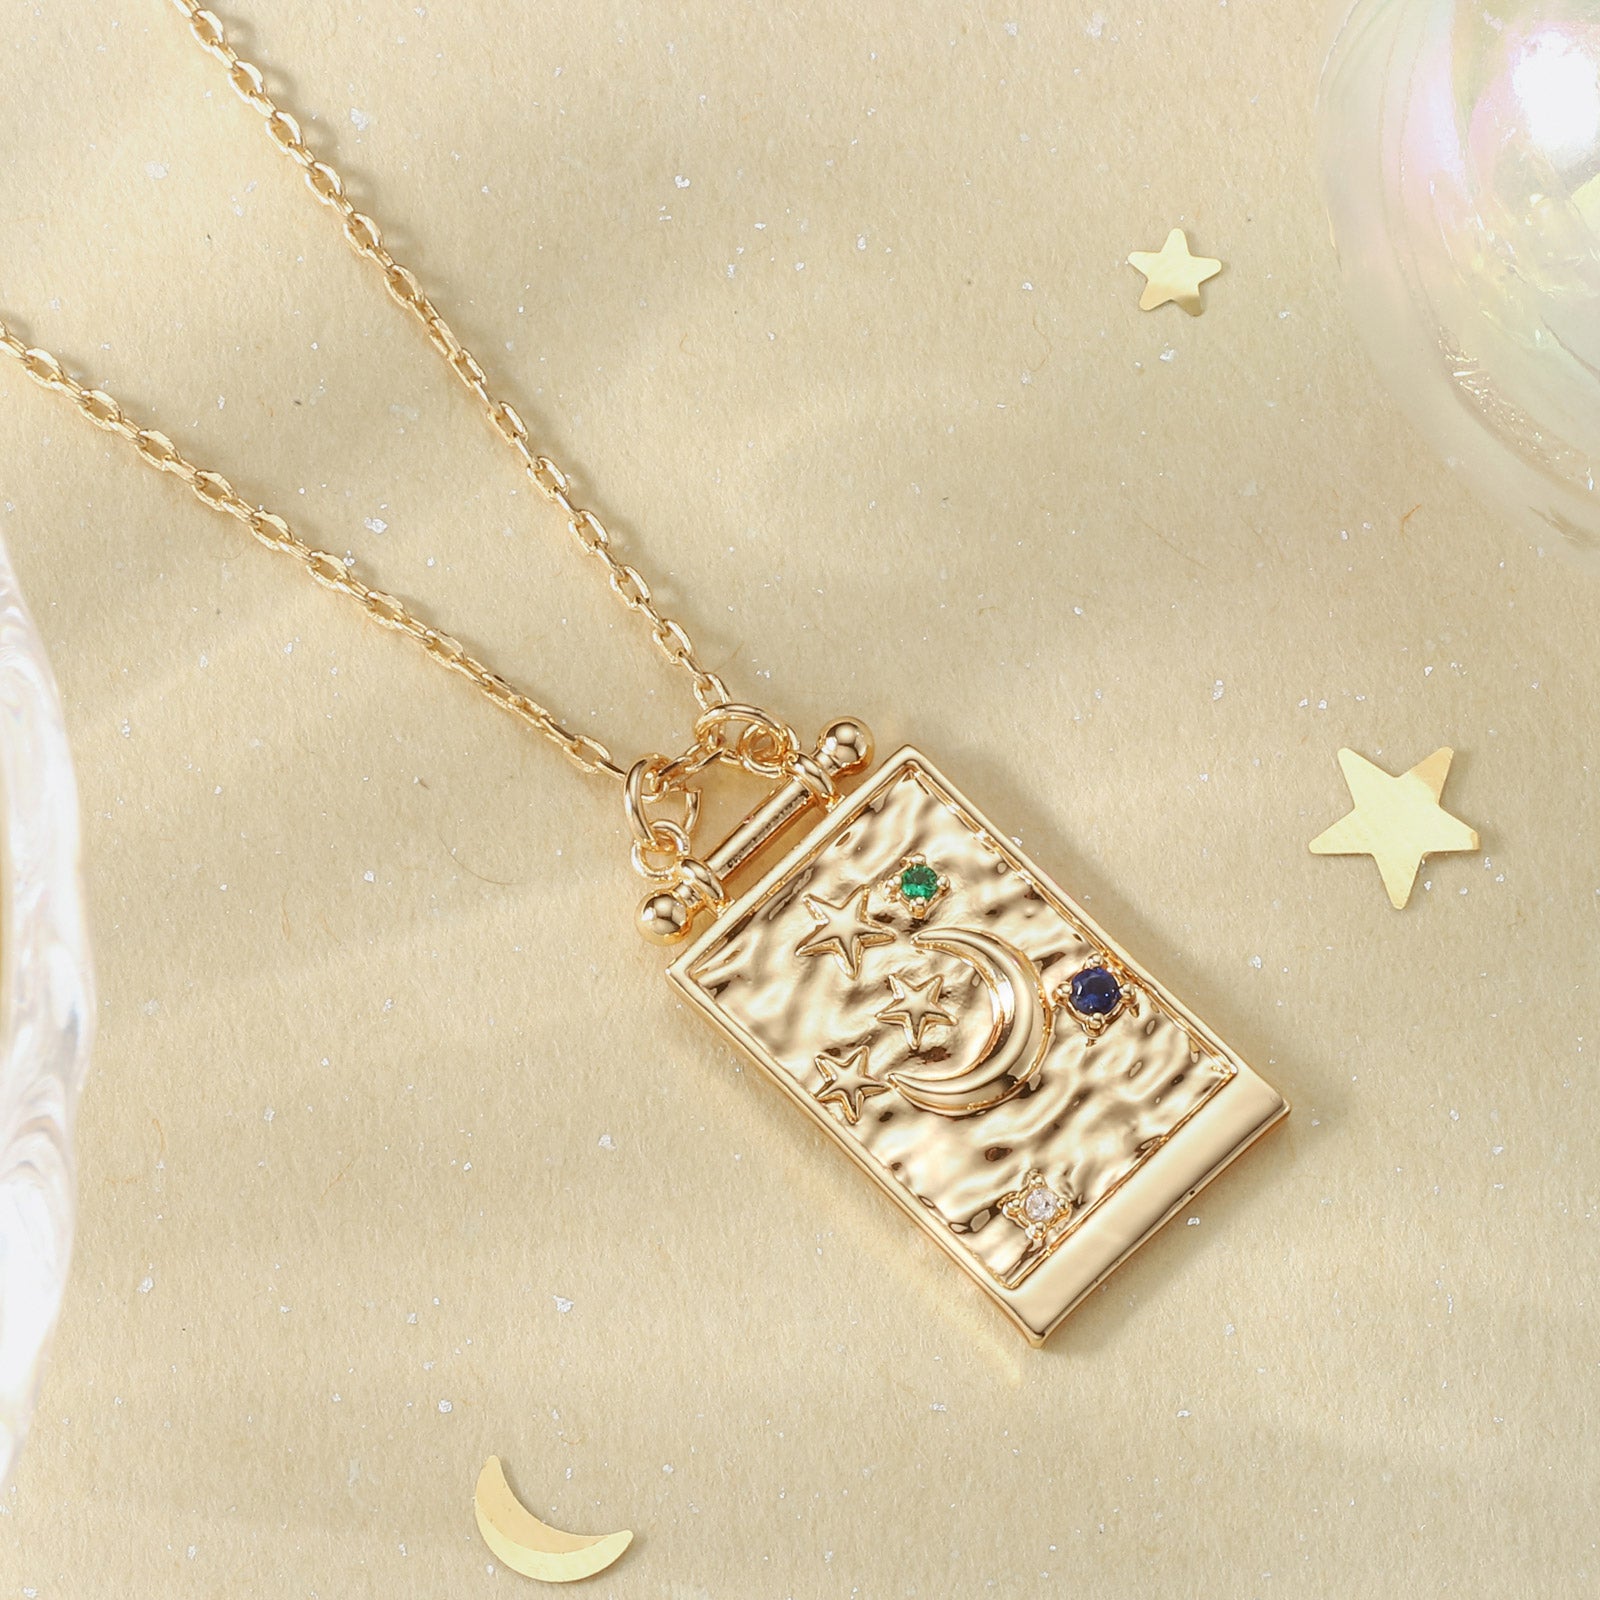 Starry Crescent Moon Star Night Necklace